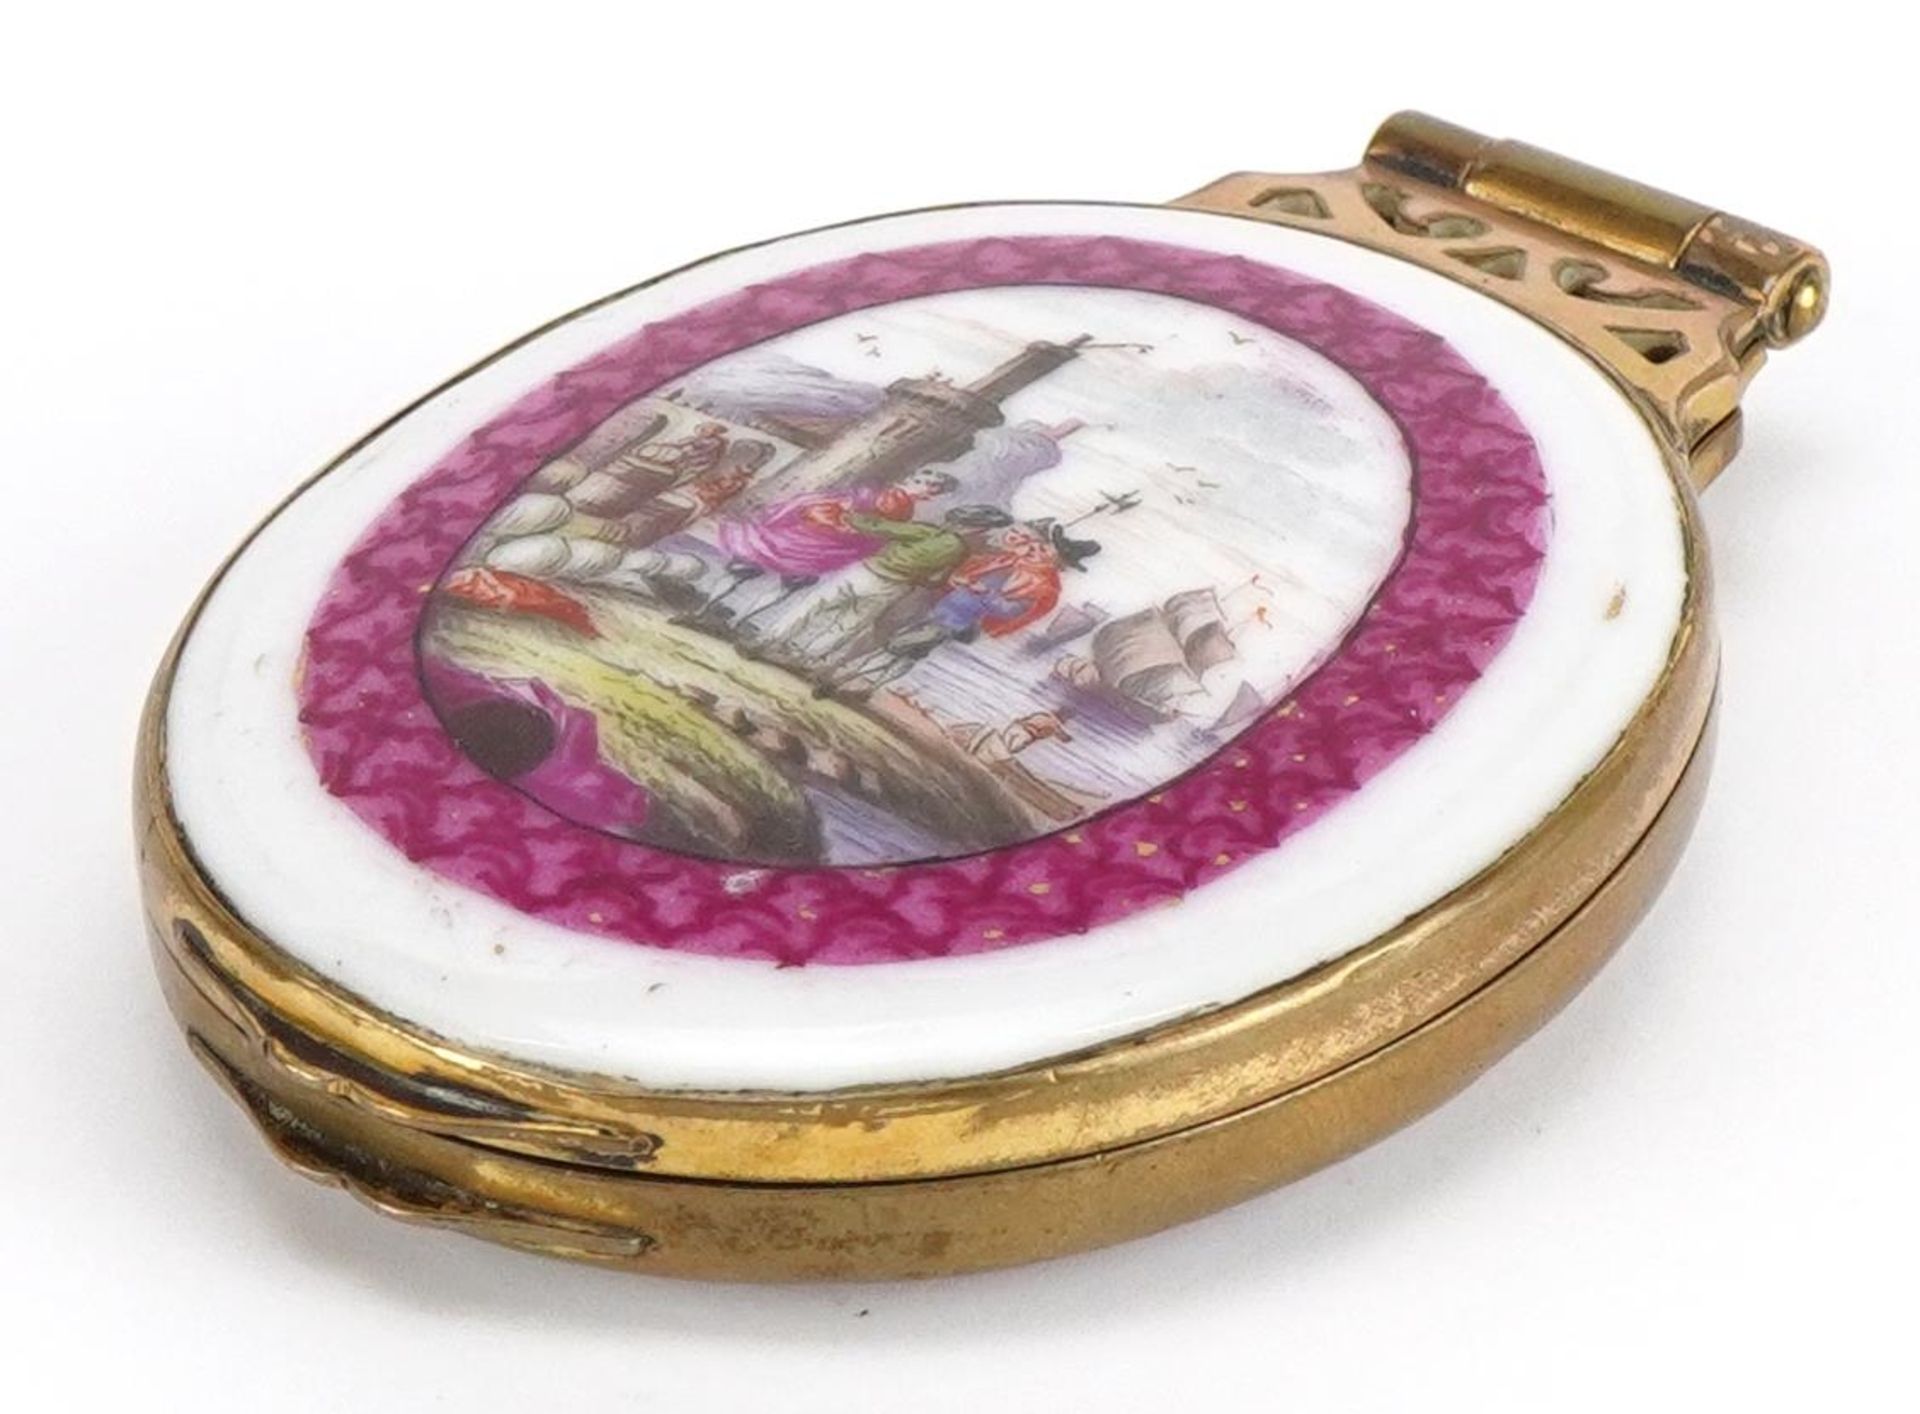 19th century Continental brass locket with two porcelain panels hand painted with 18th century